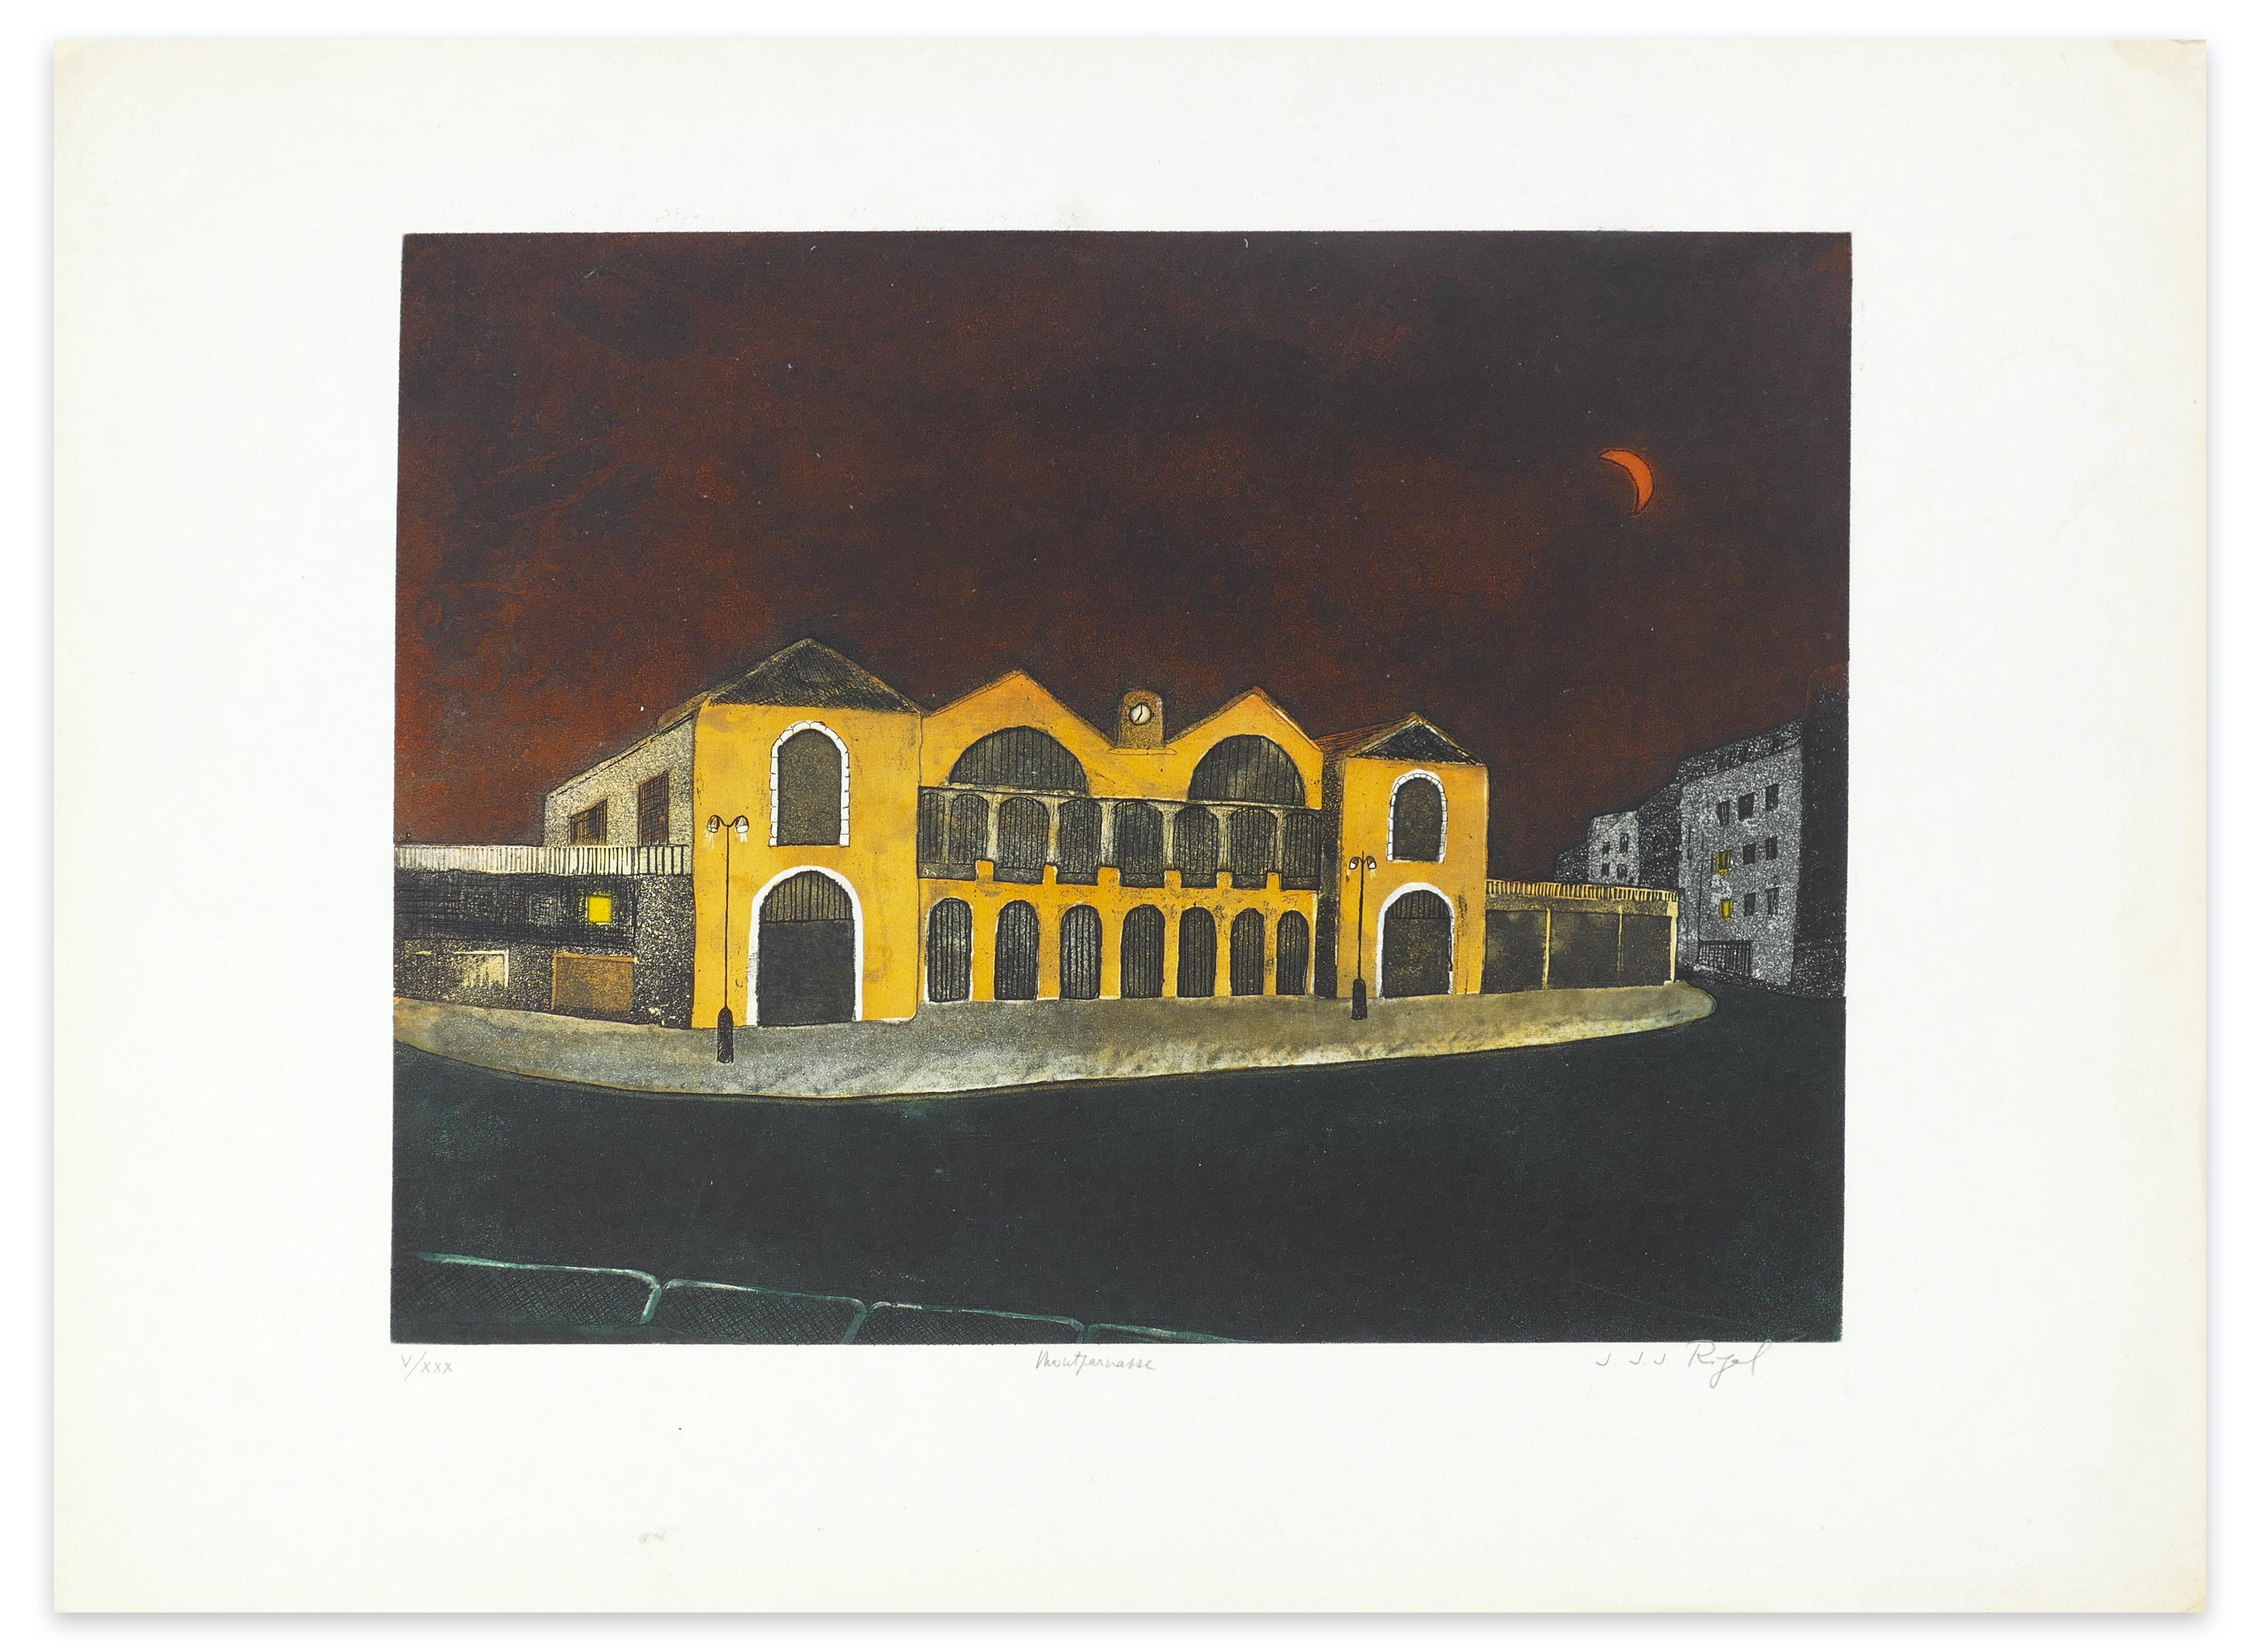 Image dimensions: 34.5 x 44.5 cm.

Montparnasse is an original etching by the French artist Jacques Joachim Jean Rigal  (1926-1997).

This is an original print from an edition of 30 prints, a beautiful artist's proof numbered in pencil in Roman